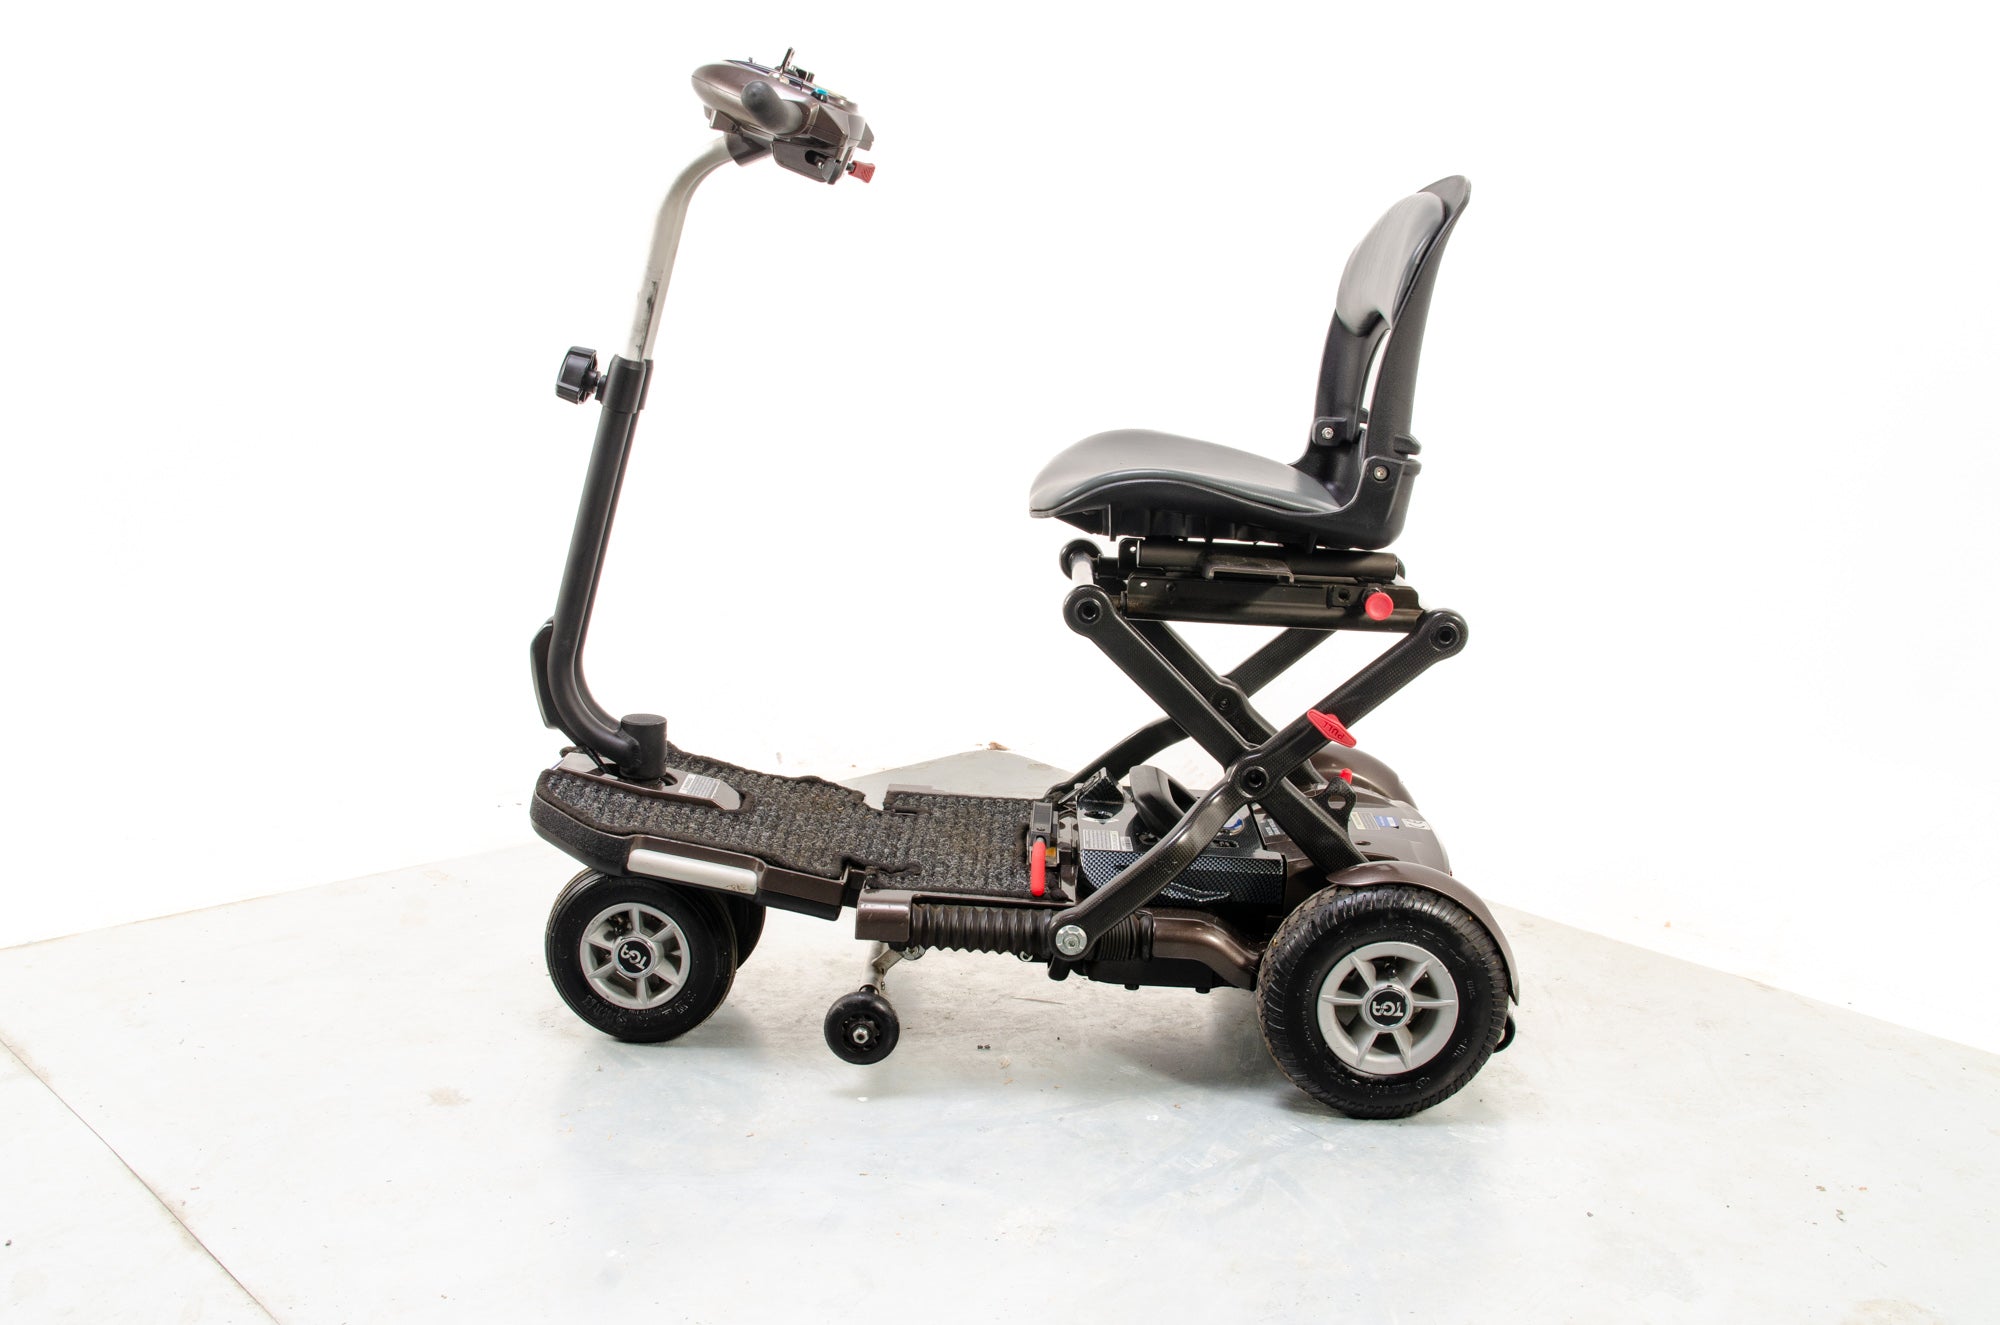 TGA Minimo Used Mobility Scooter Small Compact Folding Travel Lithium Battery Lightweight 16005